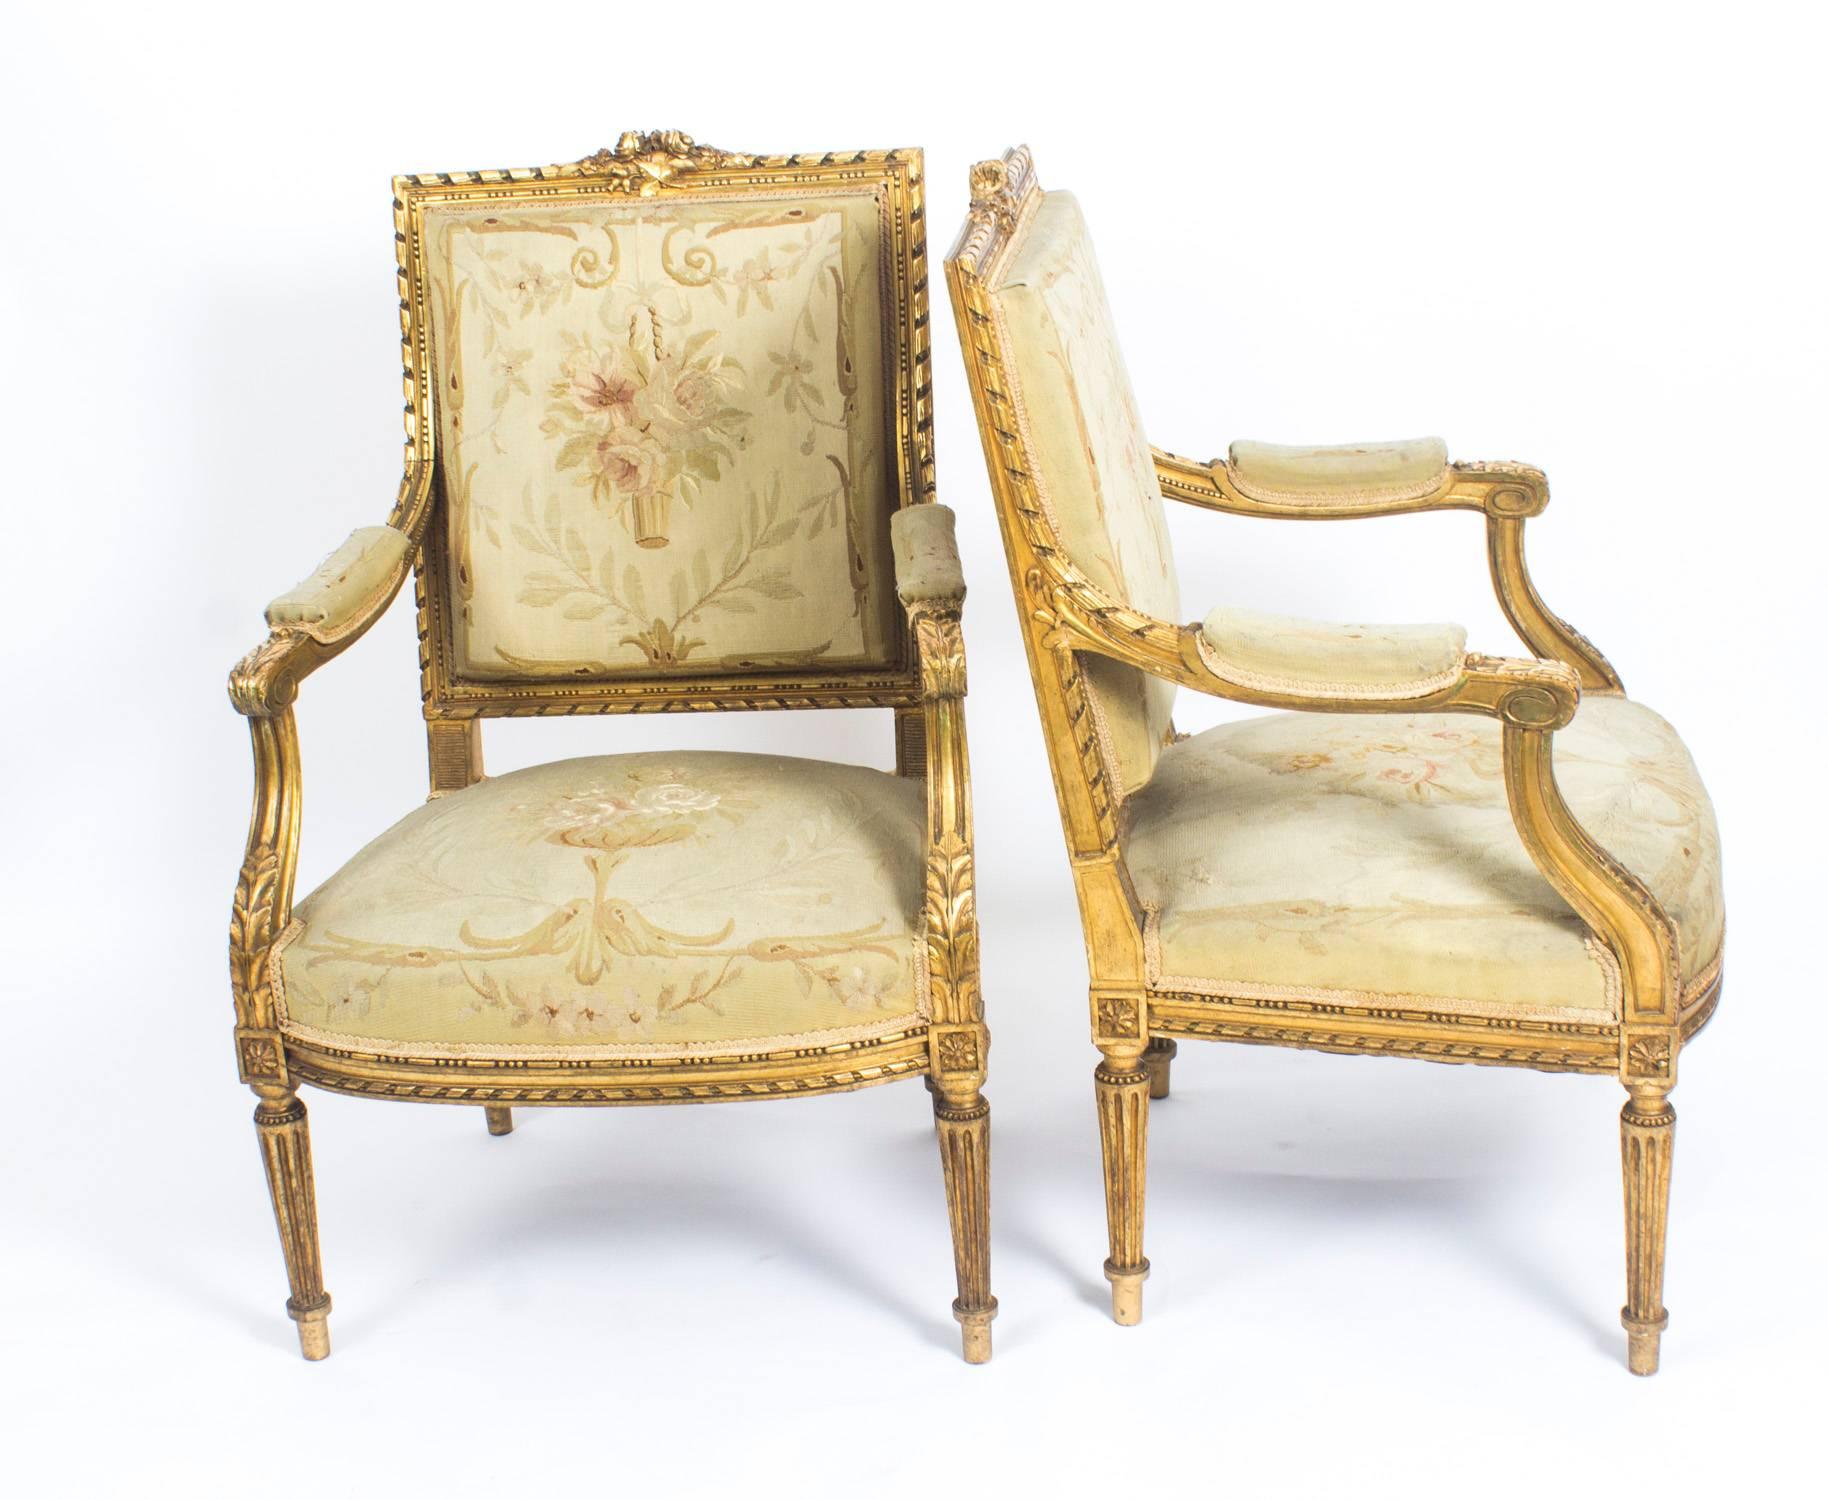 This is a beautiful antique set of four Louis XVI style giltwood fauteiuls or open armchairs, circa 1880 in date.   

The original giltwoood is beautiful in colour, each chair features a floral carved crested toprail with acanthus clasped arm padded